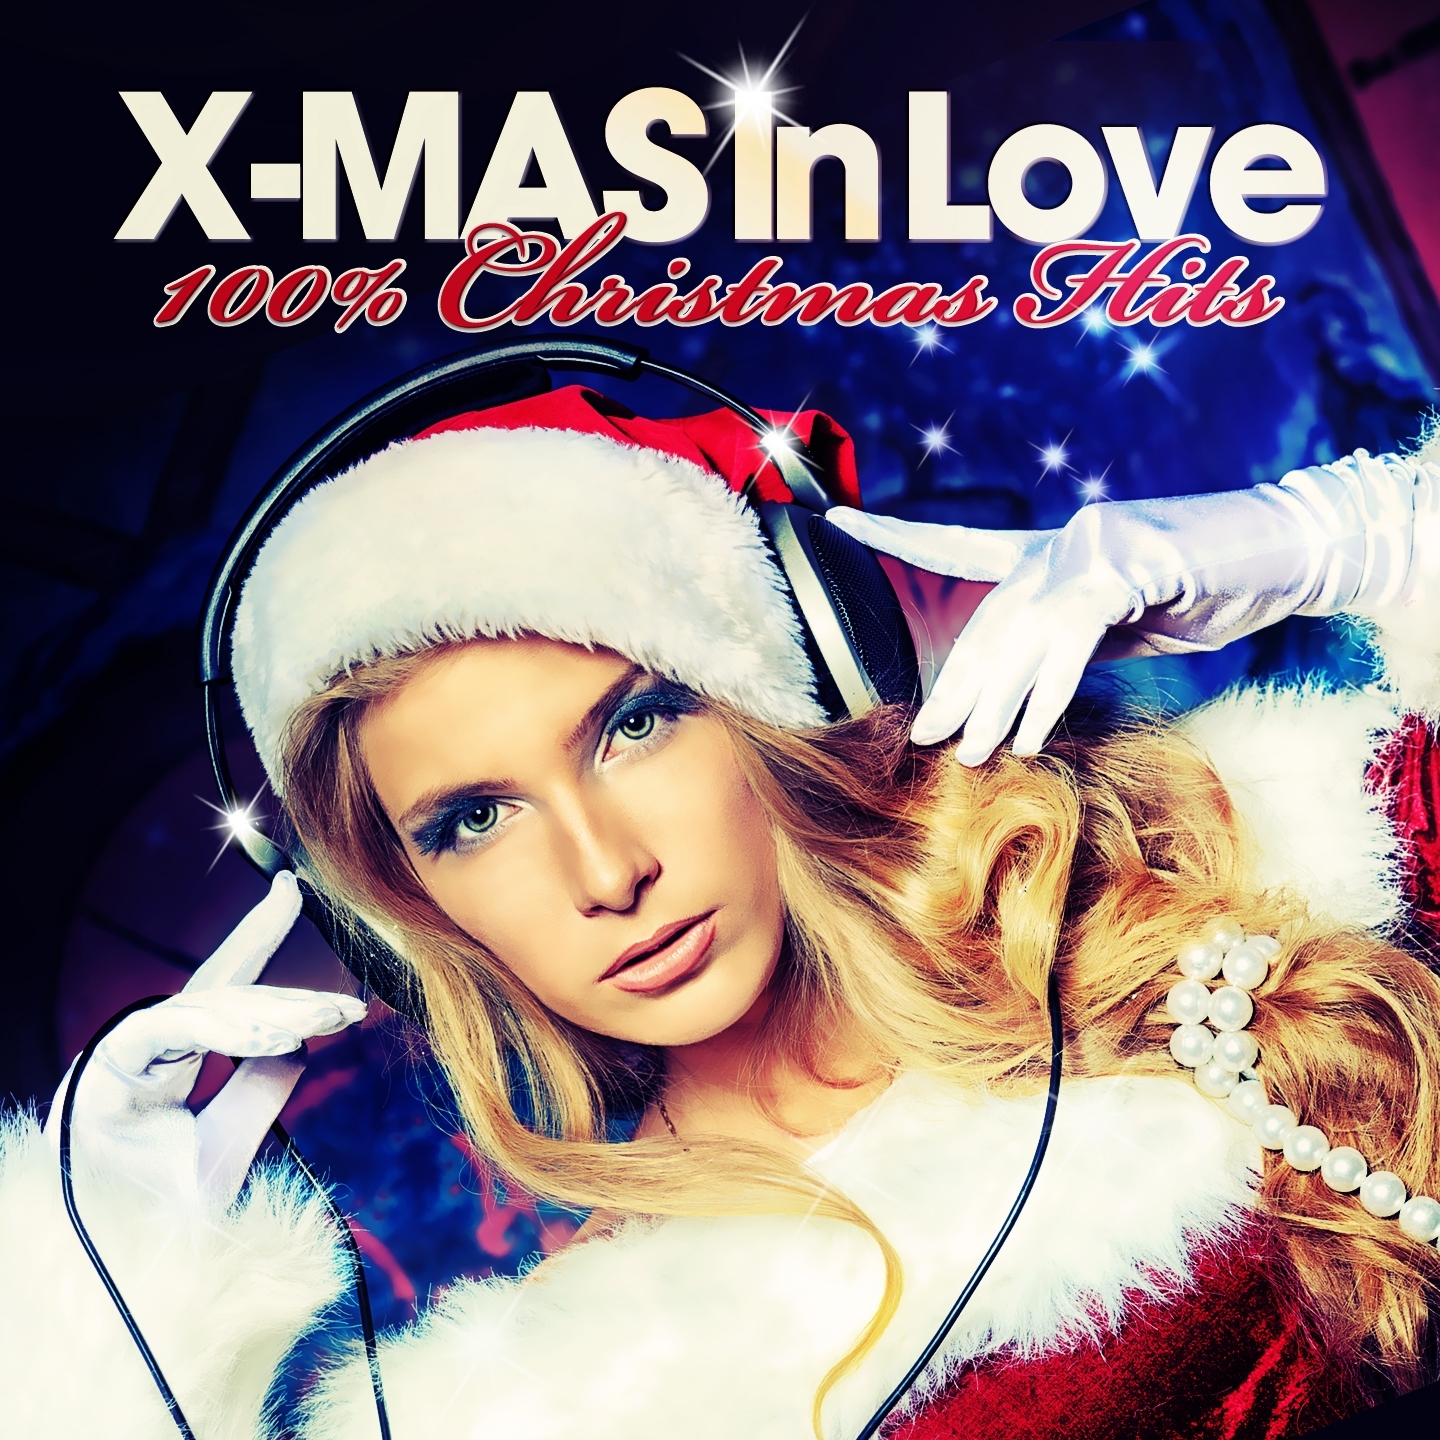 X-Mas in Love, 100% Christmas Hits (Best of Original and Traditional Lounge and Chill Out Winter Pearls)